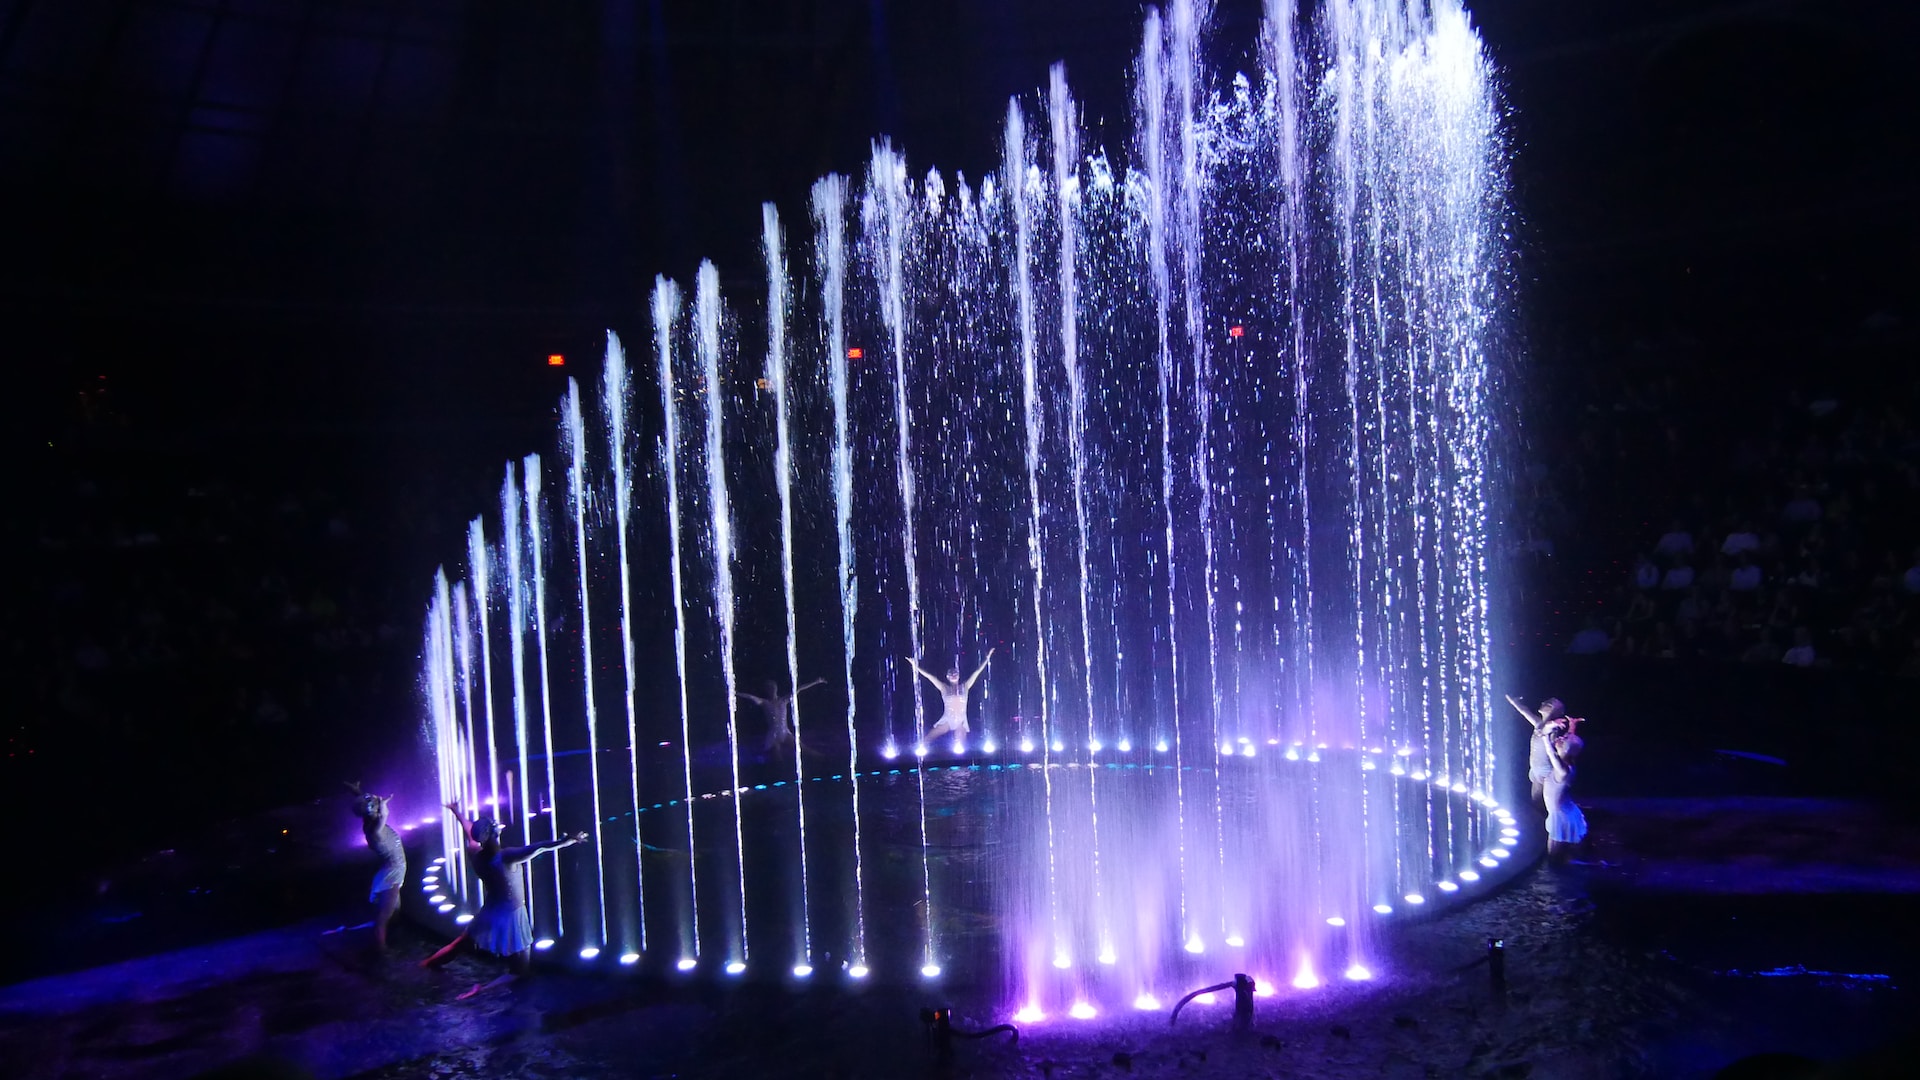 Dancers performing around a water and light show in the dark.